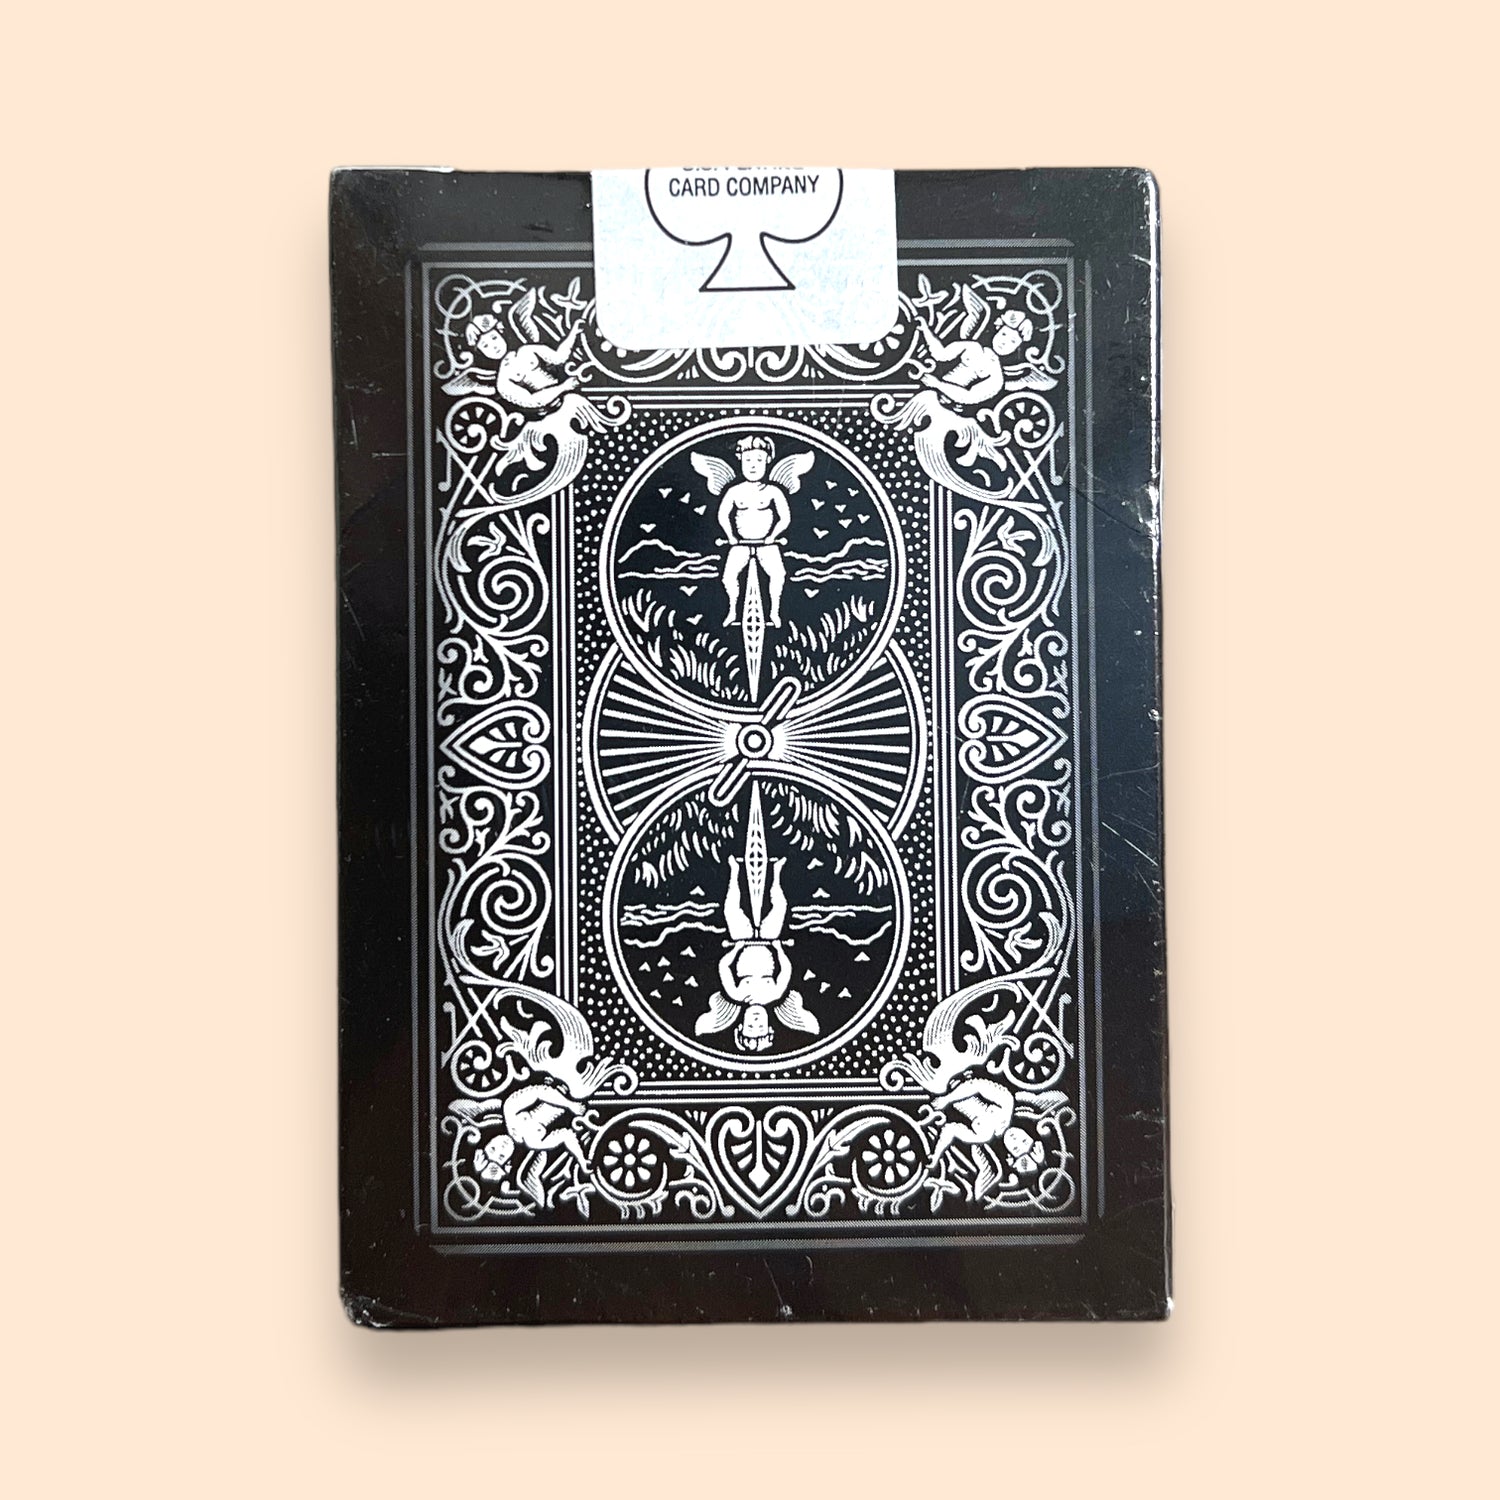 Bicycle 1st Edition Black Ghost V1 playing cards